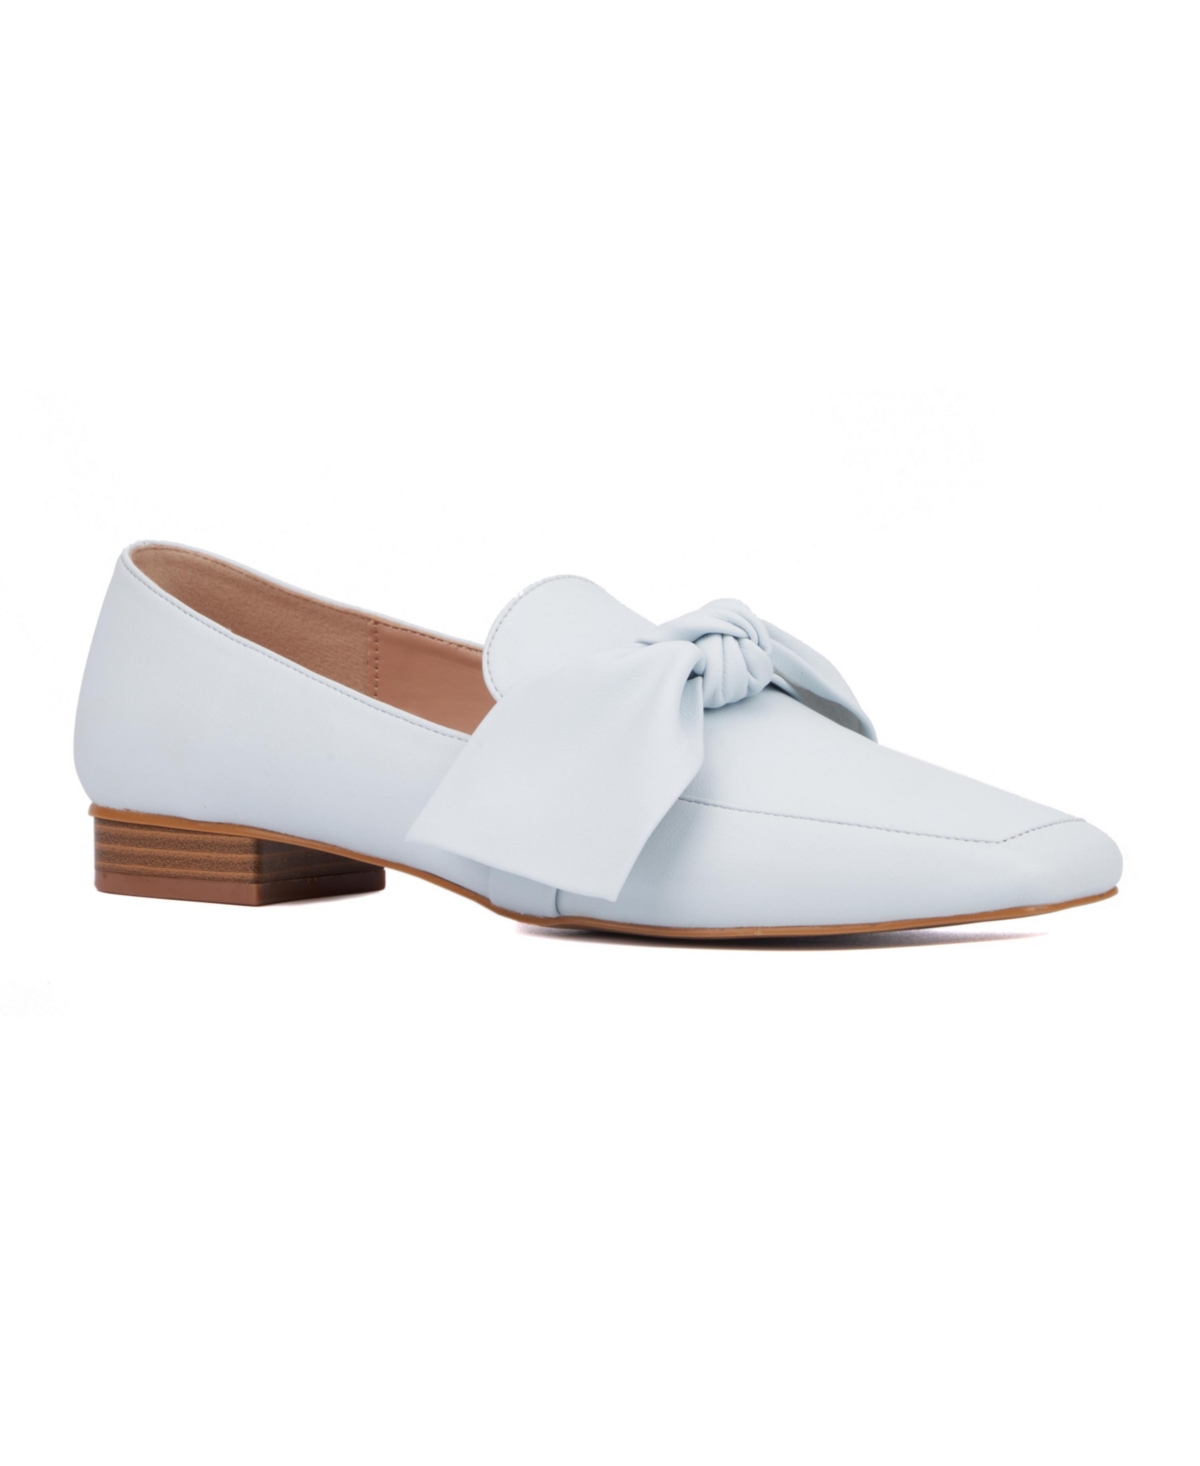 NEW YORK AND COMPANY WOMEN'S DOMINCA LOAFER